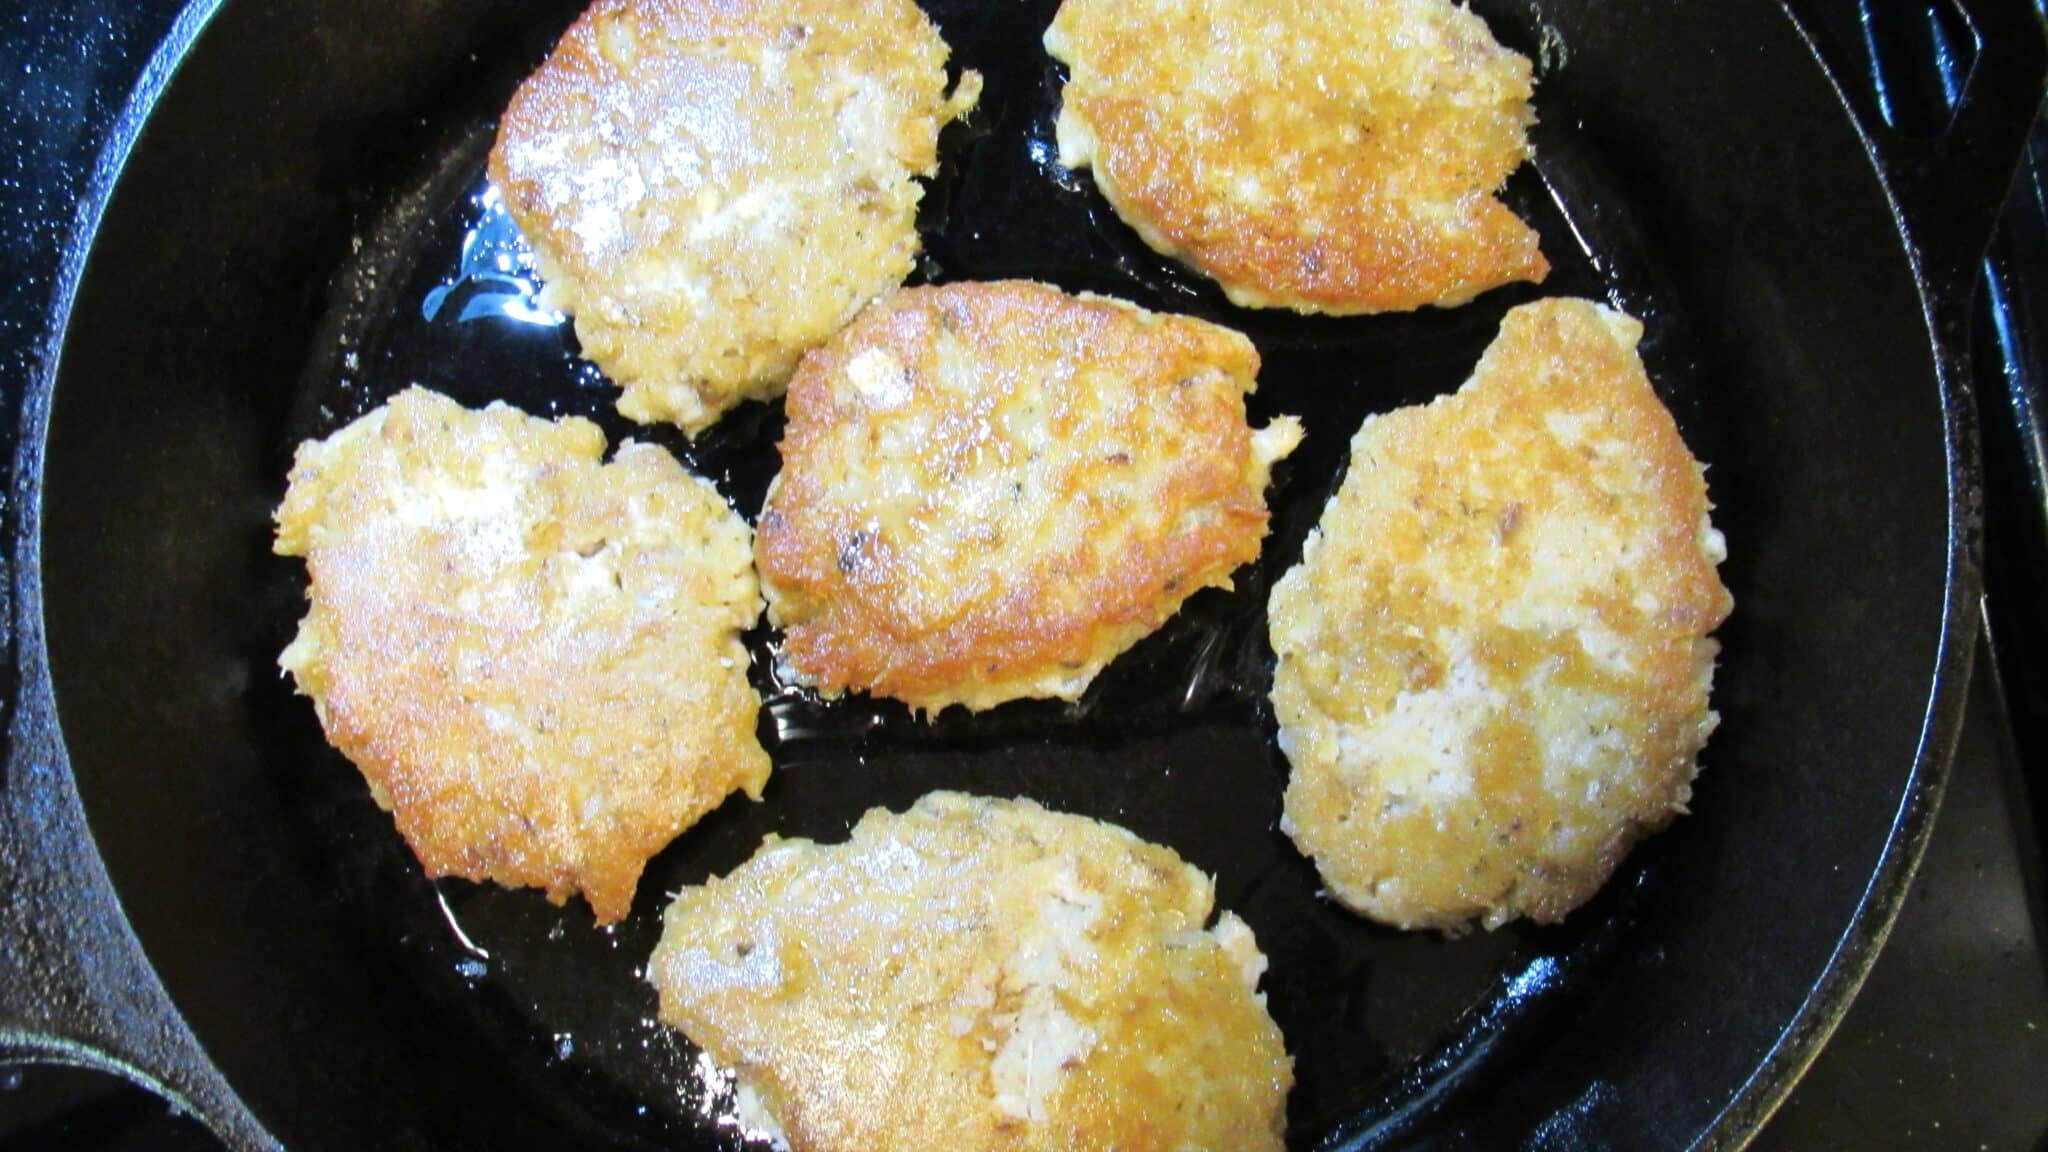 patties fried in a cast-iron skillet.